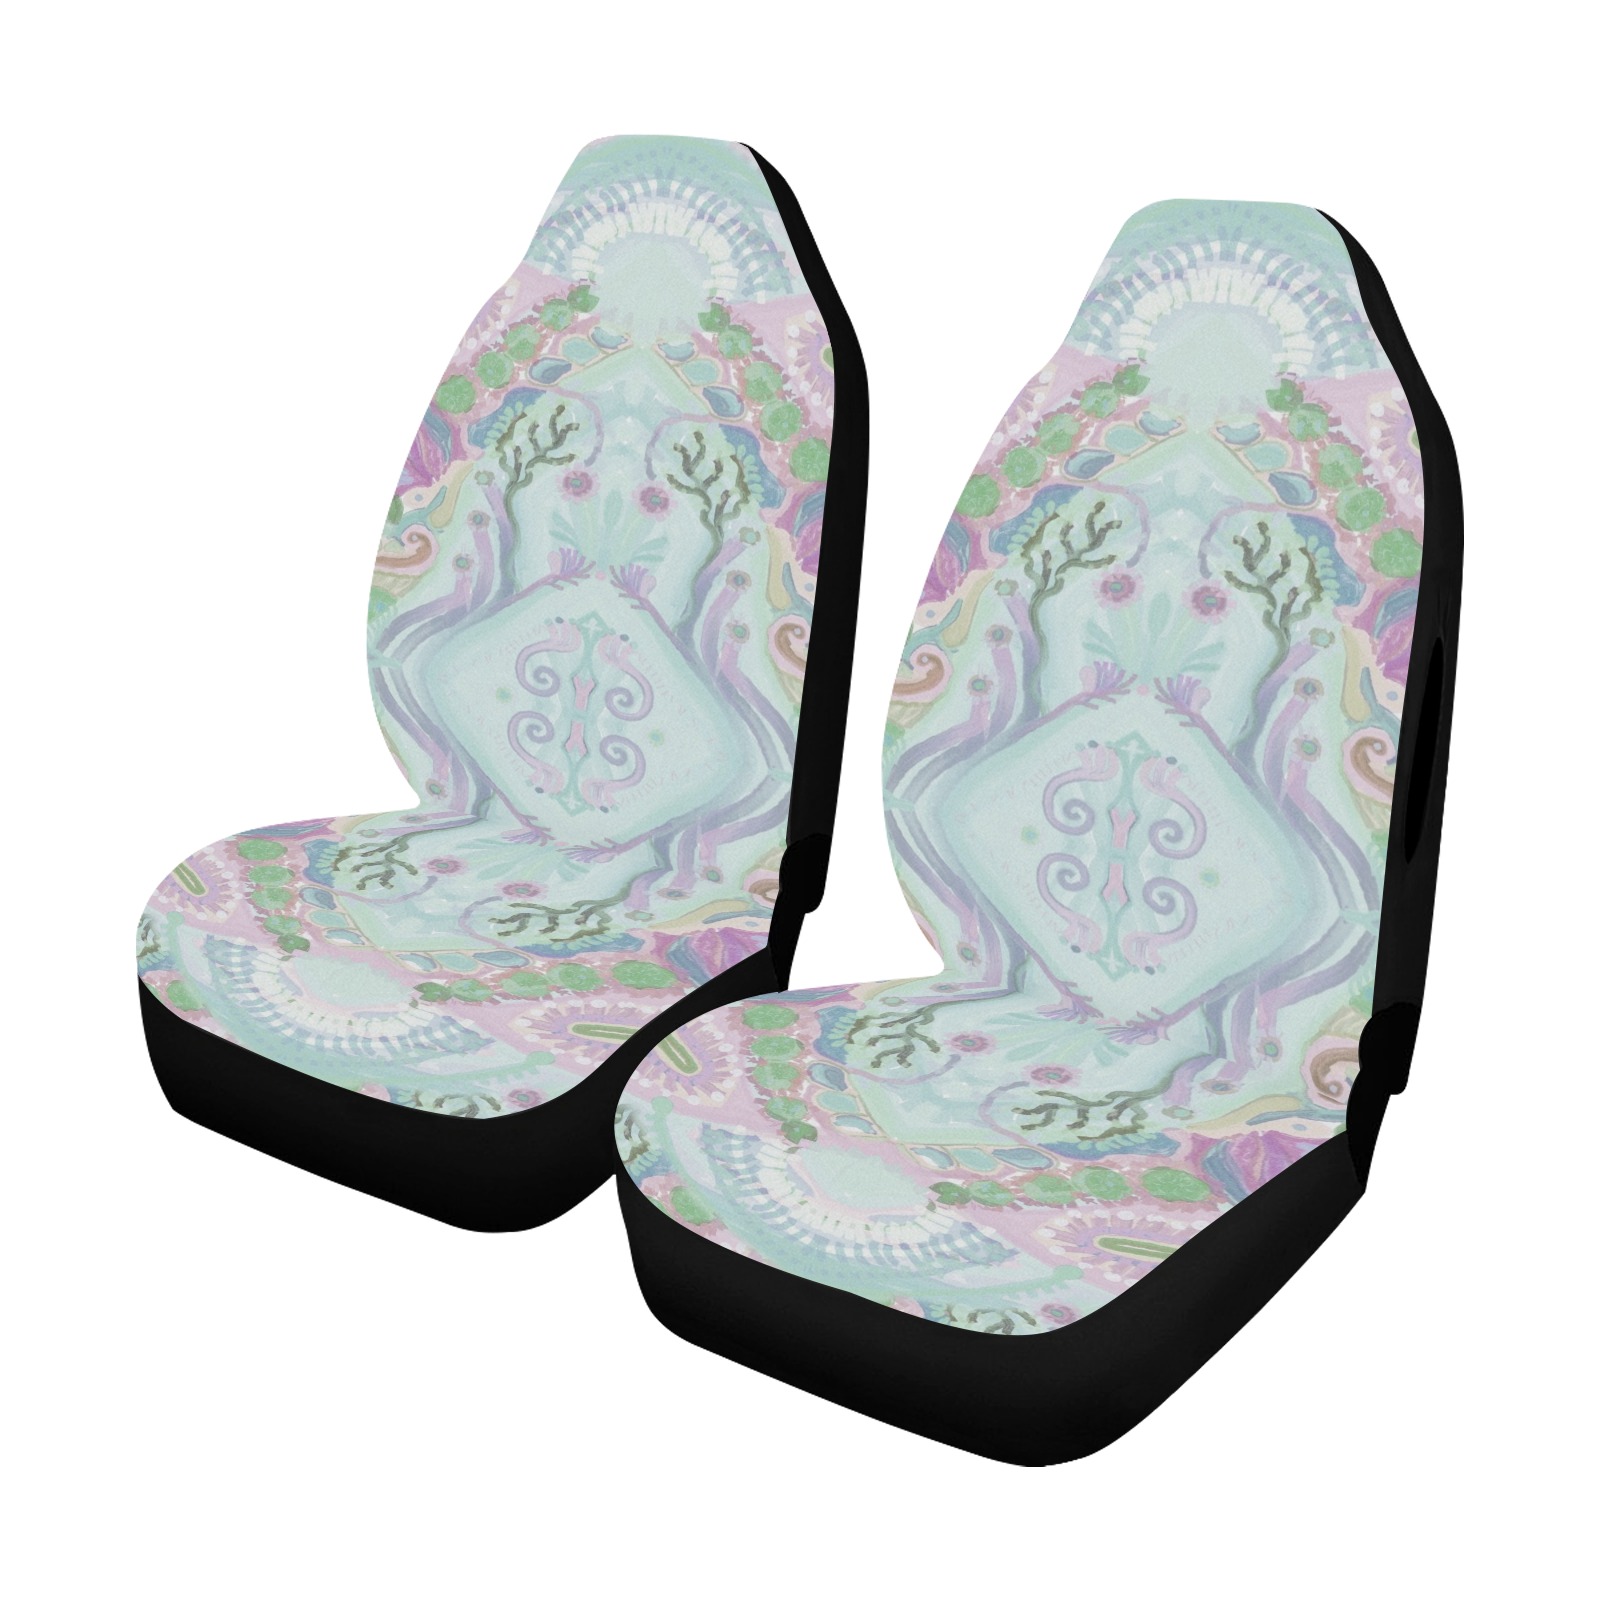 isles5 Car Seat Cover Airbag Compatible (Set of 2)